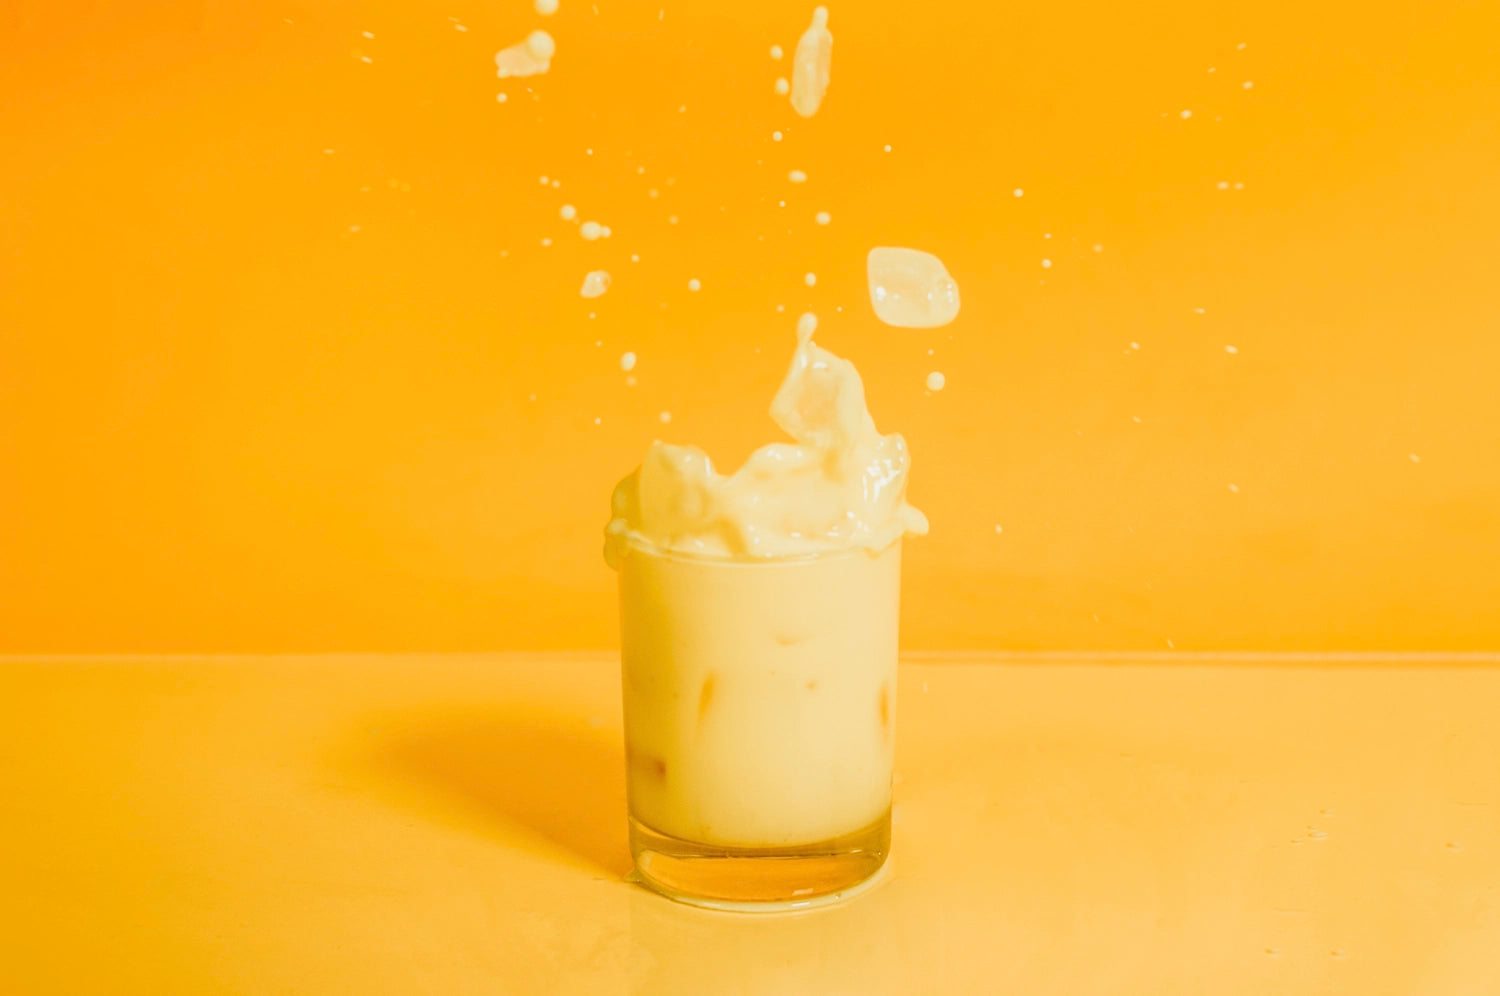 A glass of saffron latte made with The Fullest's Warm Feelings saffron latte mix, surrounded by splashes, on an orange background.